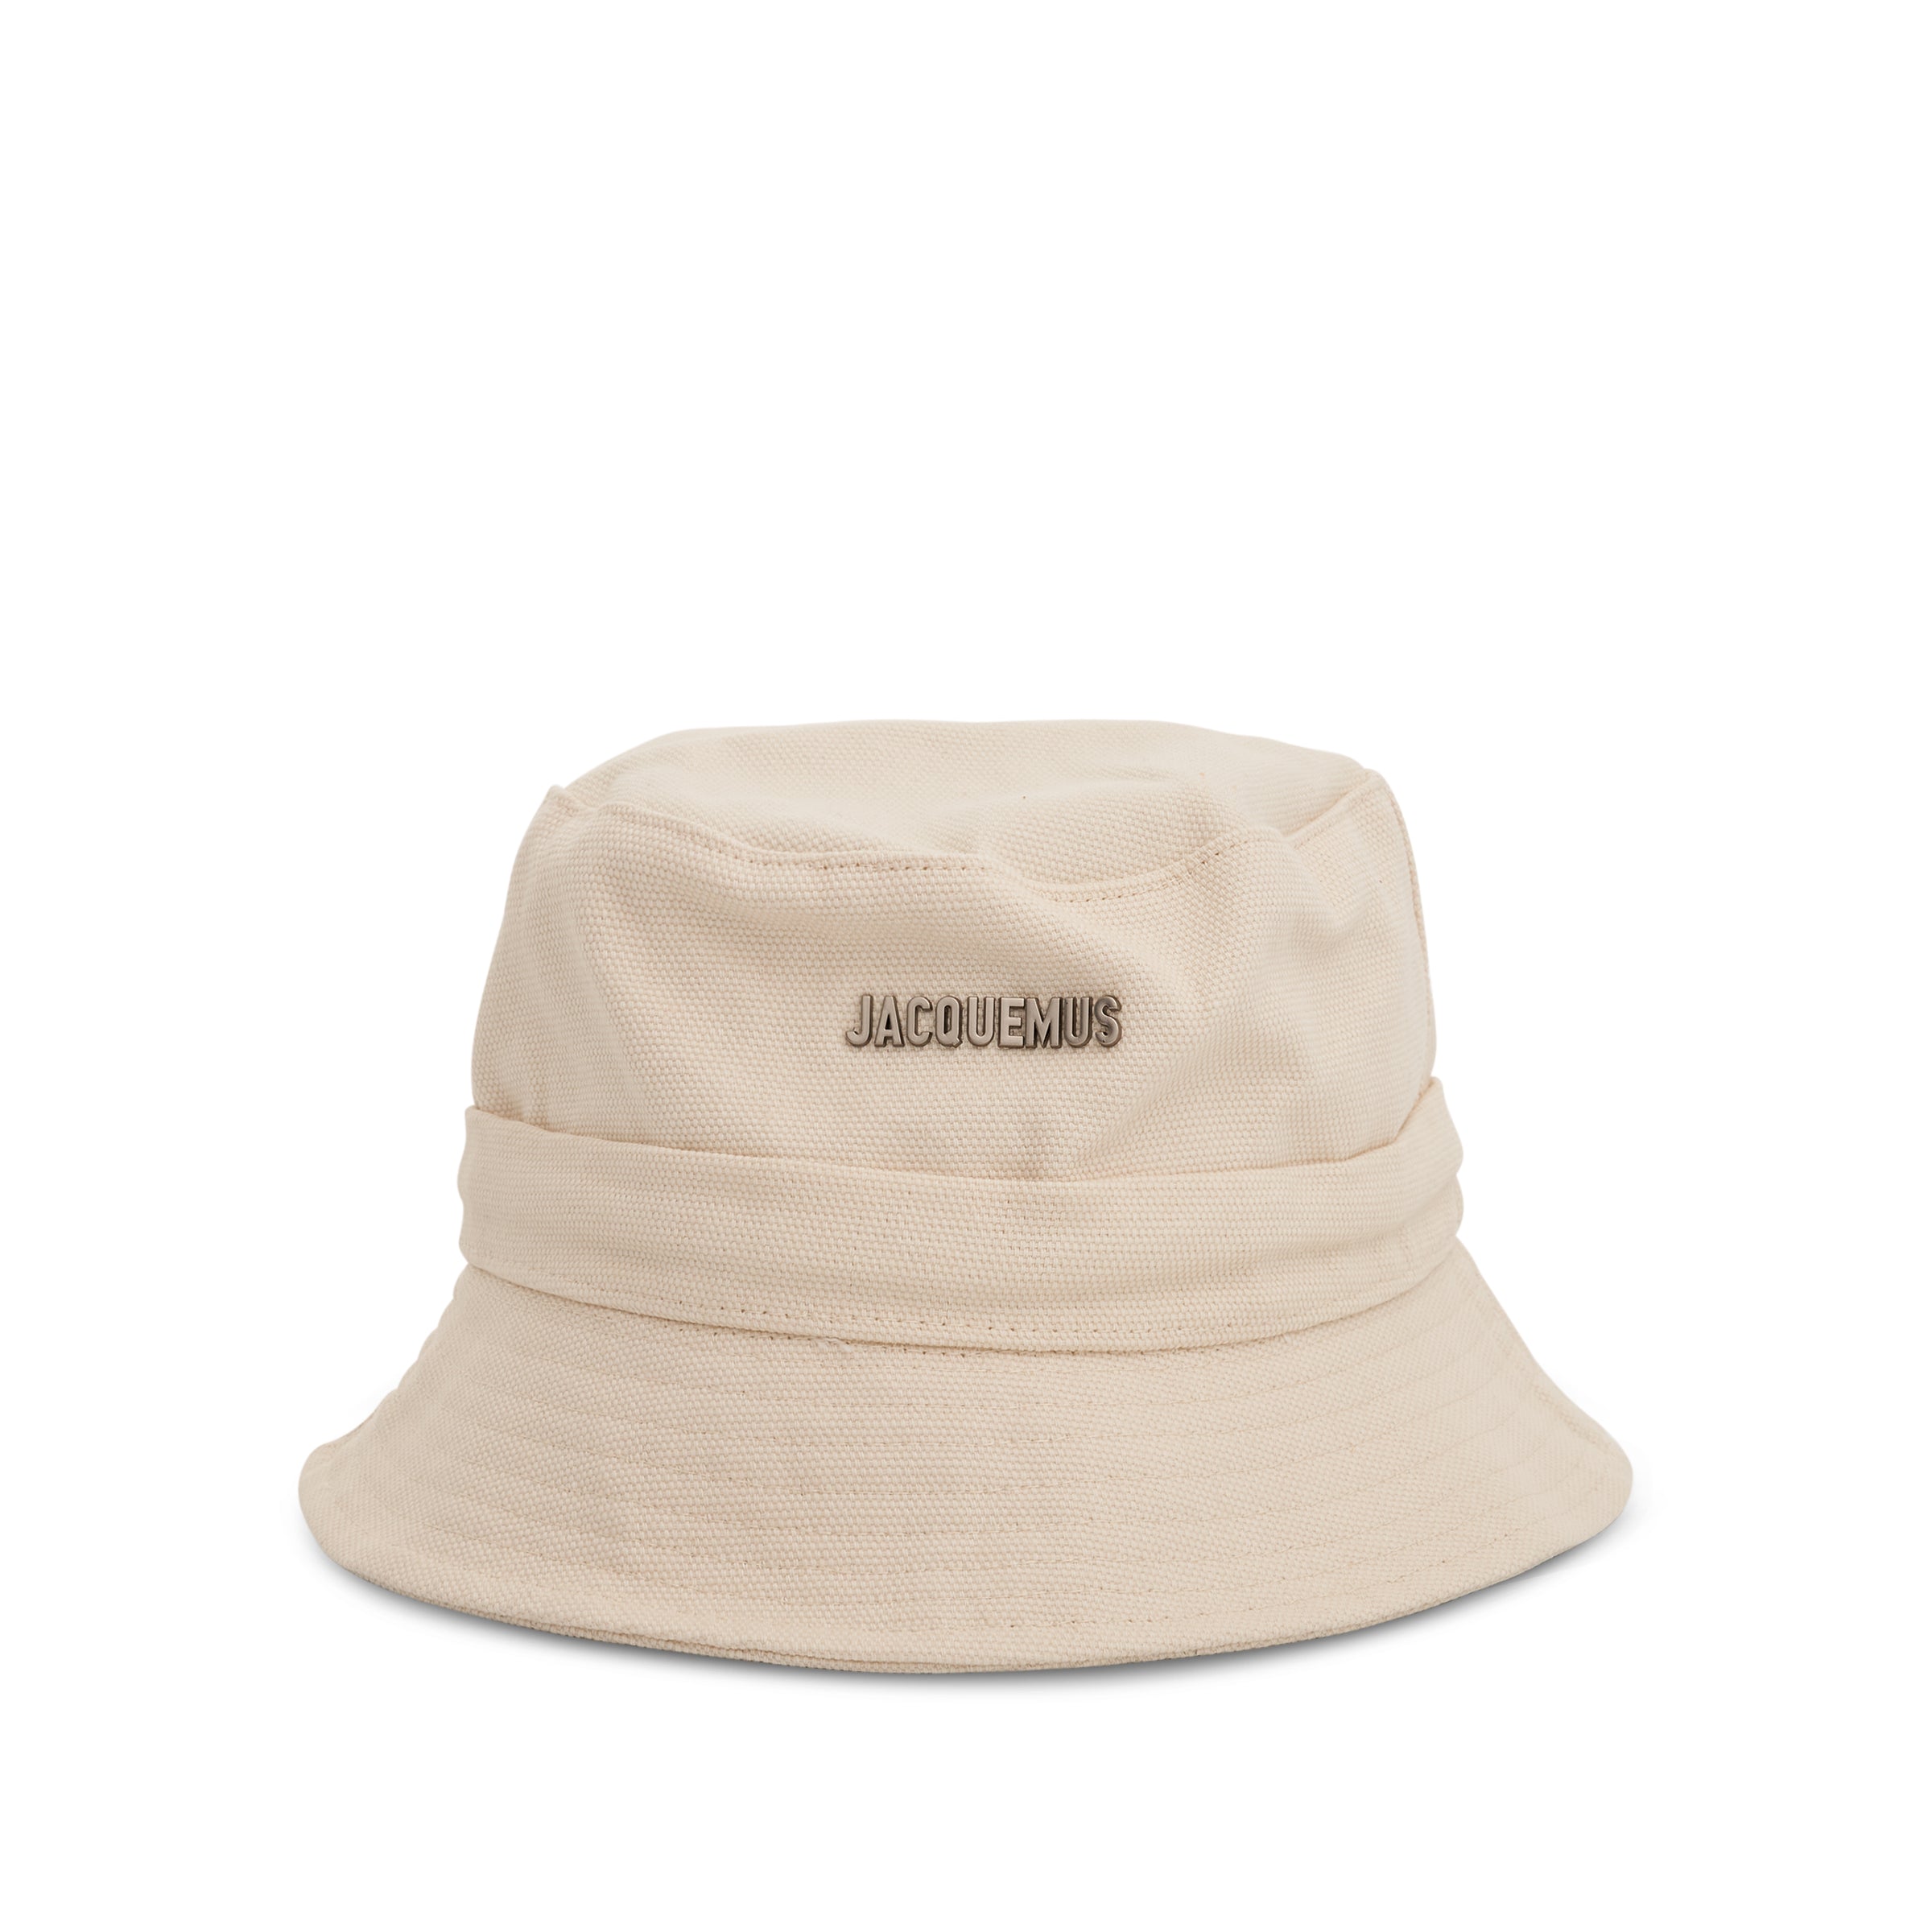 100% Organic Cotton Baby/Kids Bucket Hat by Pickapooh from Woollykins